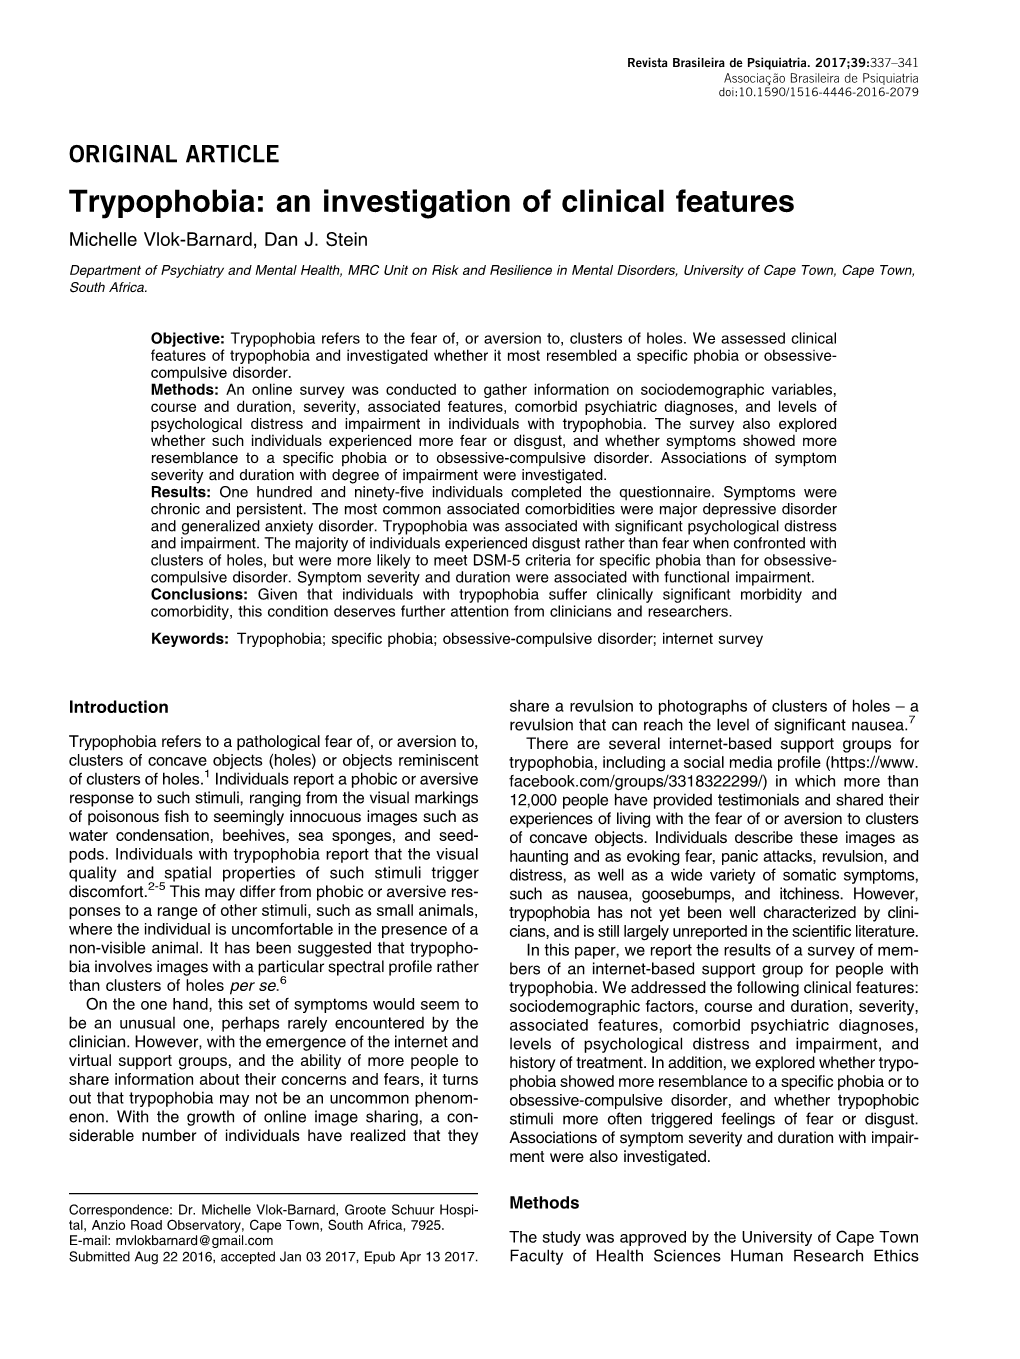 Trypophobia: an Investigation of Clinical Features Michelle Vlok-Barnard, Dan J